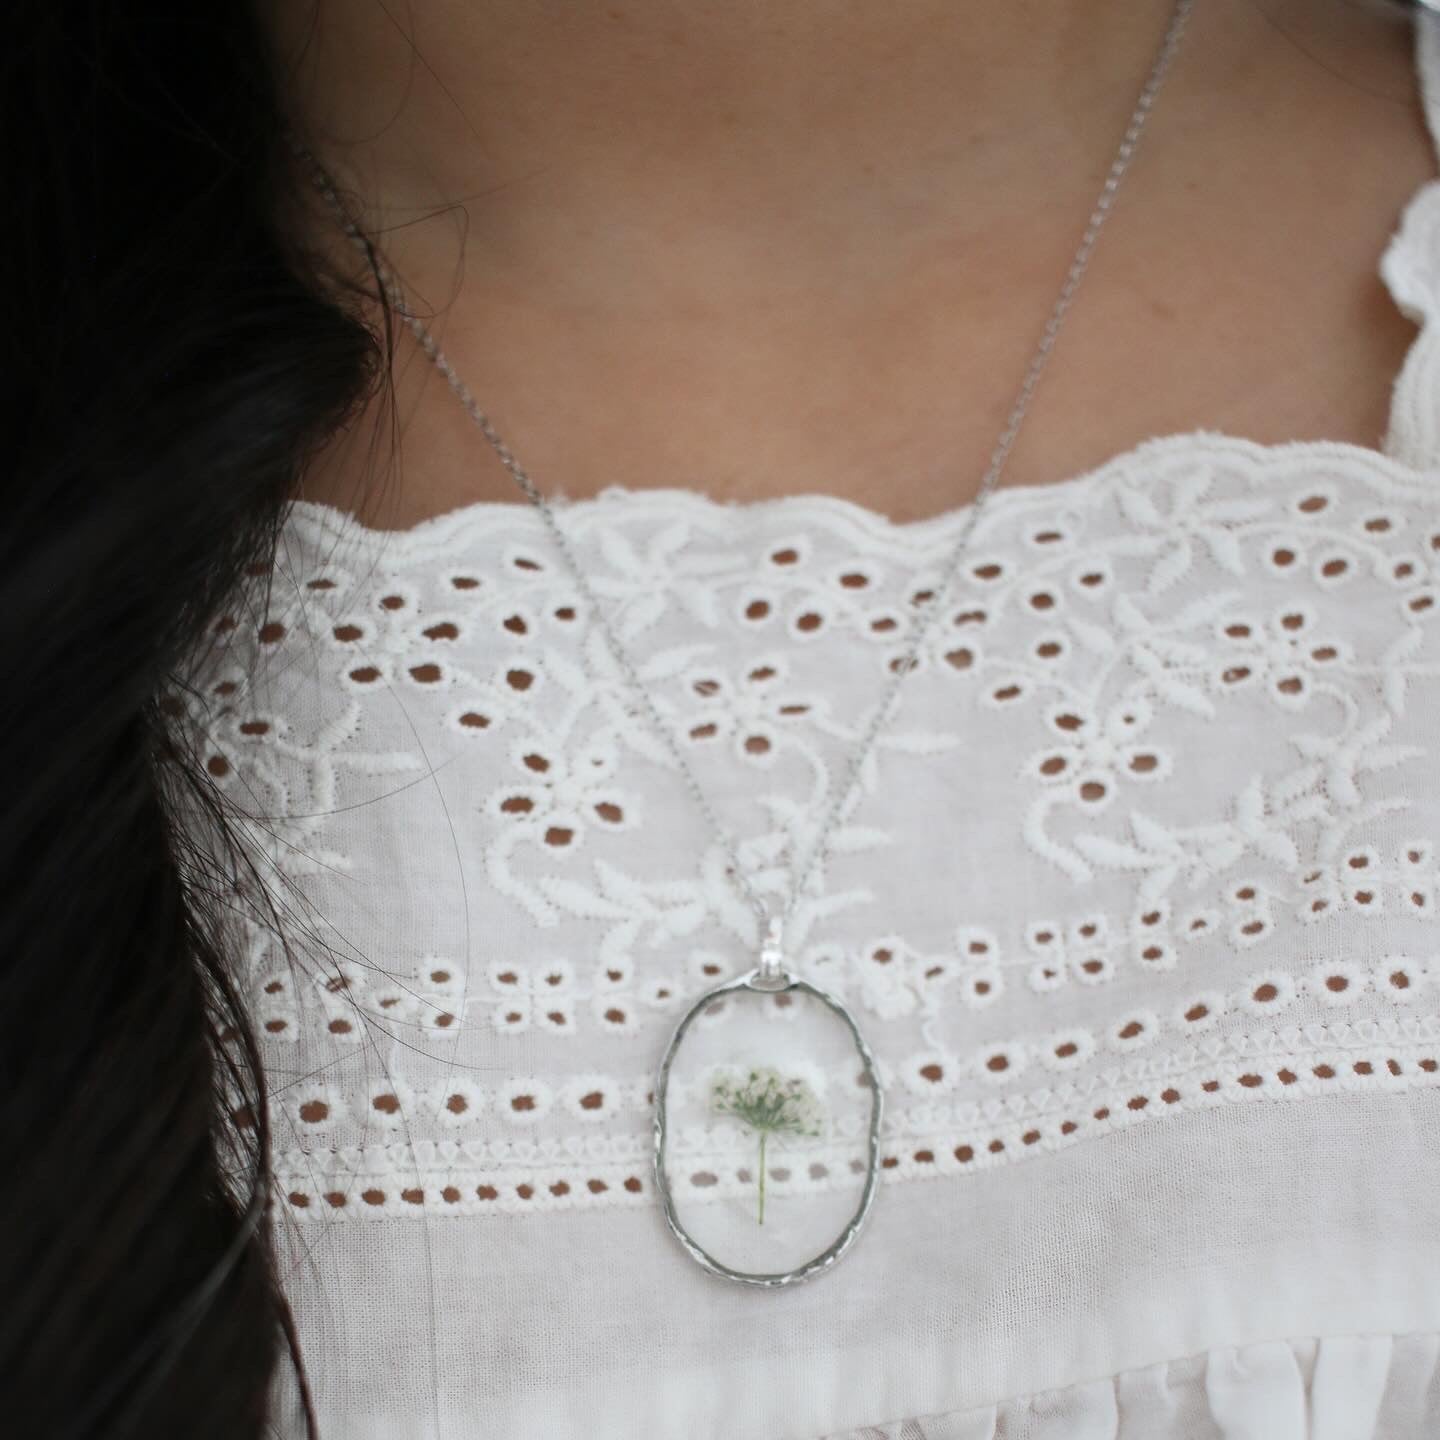 Queen Anne's Lace Pendant in Silver